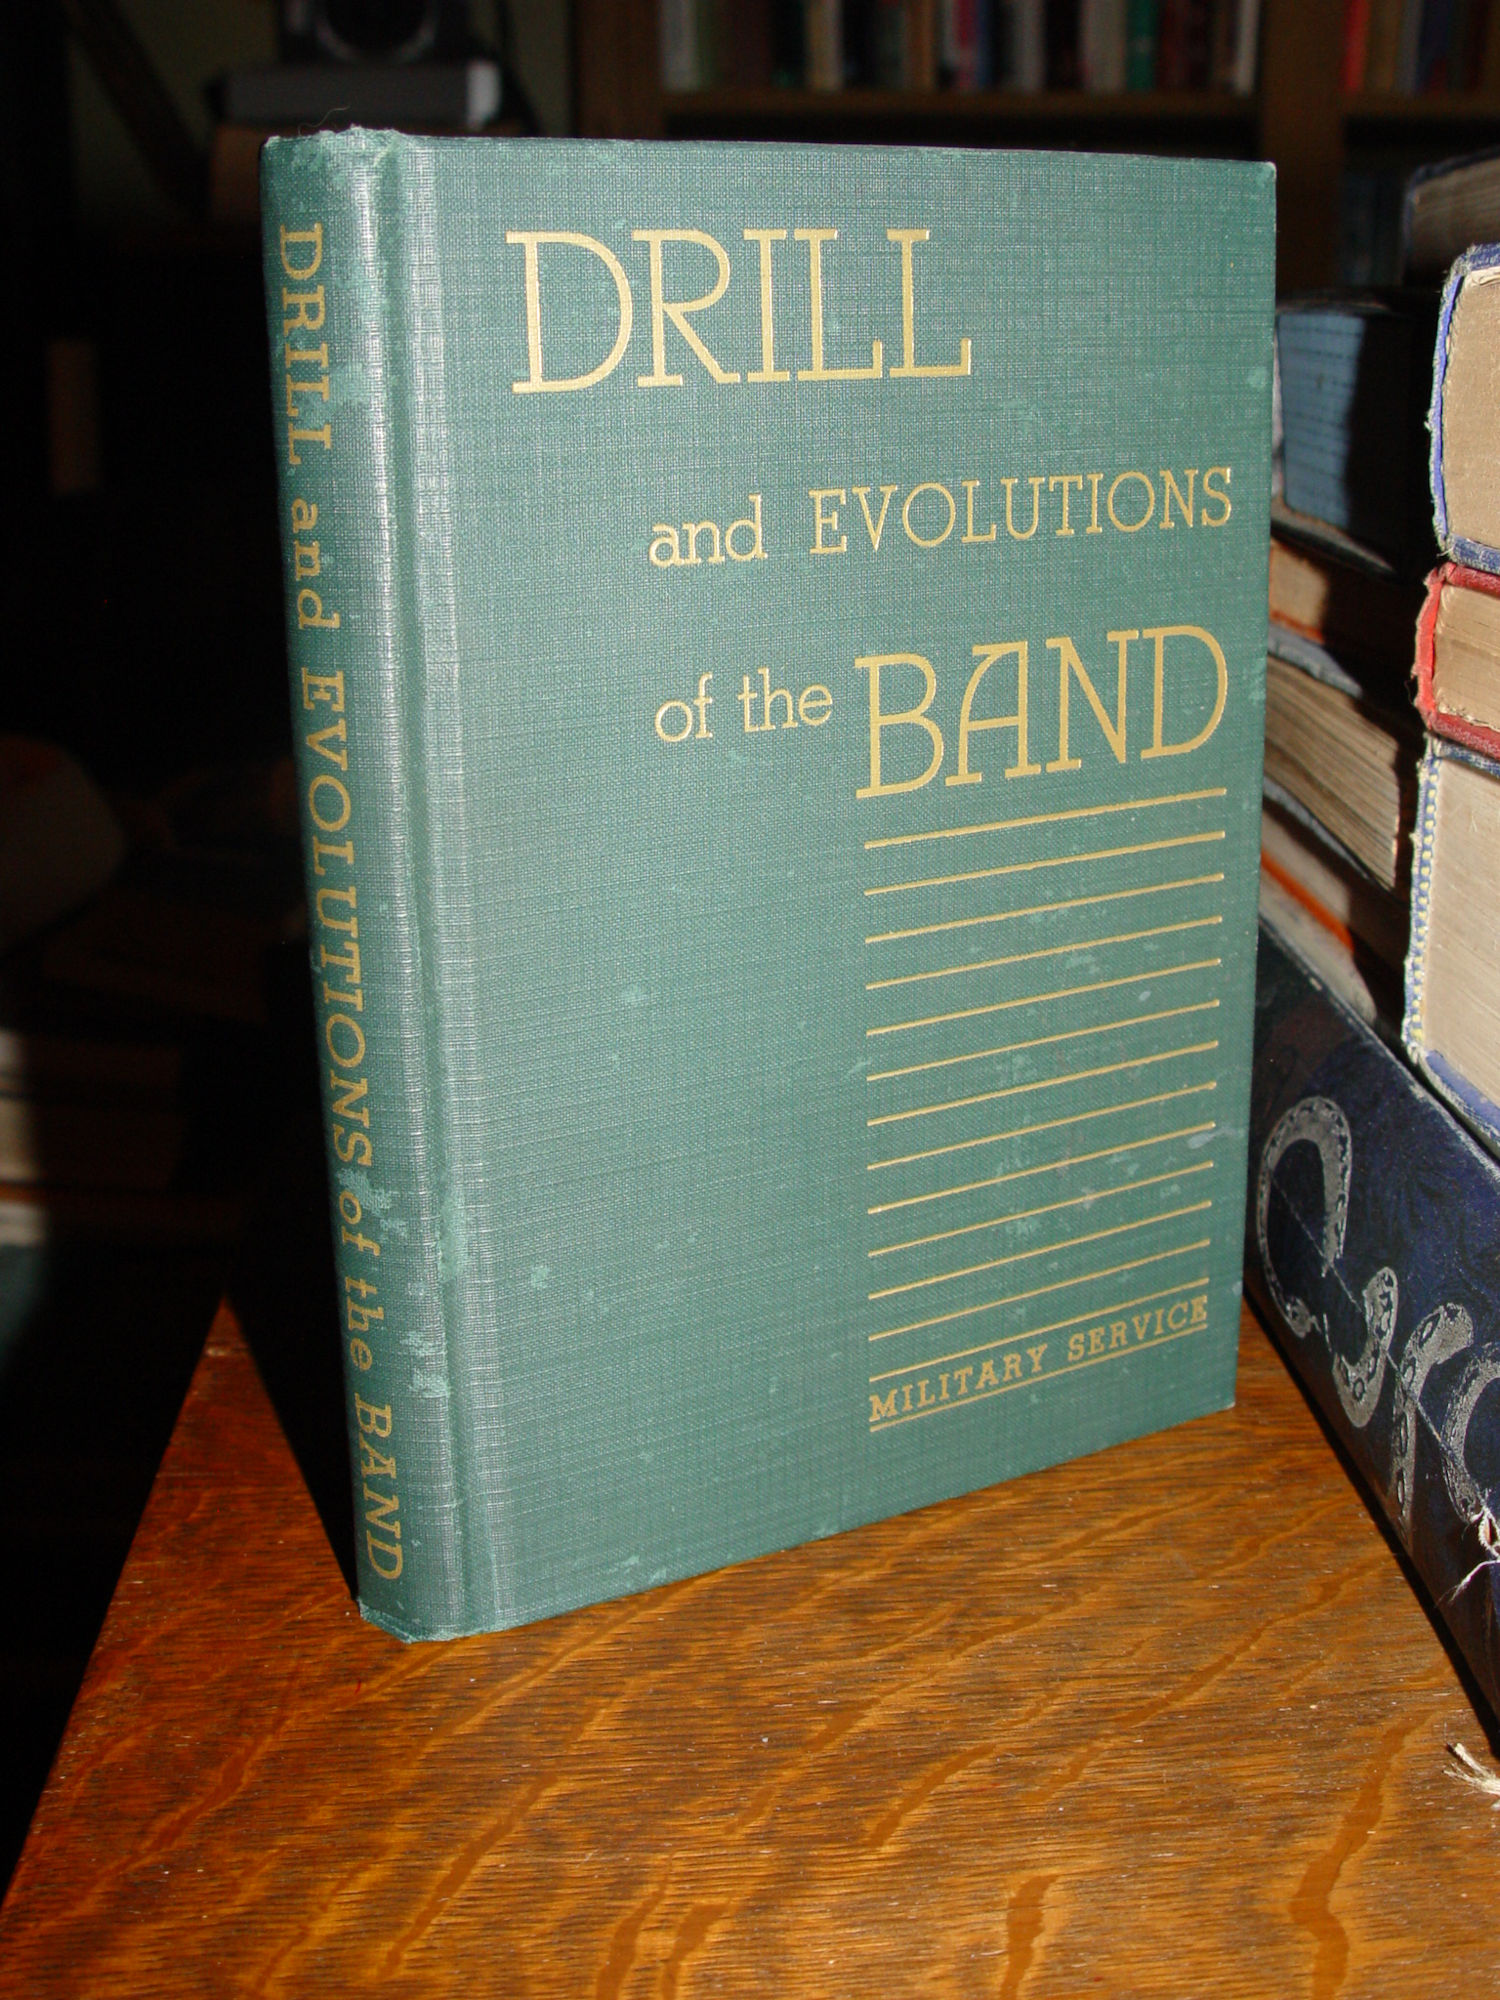 Drill and Evolutions of the Band 1943 by
                        Russel B. Reynolds